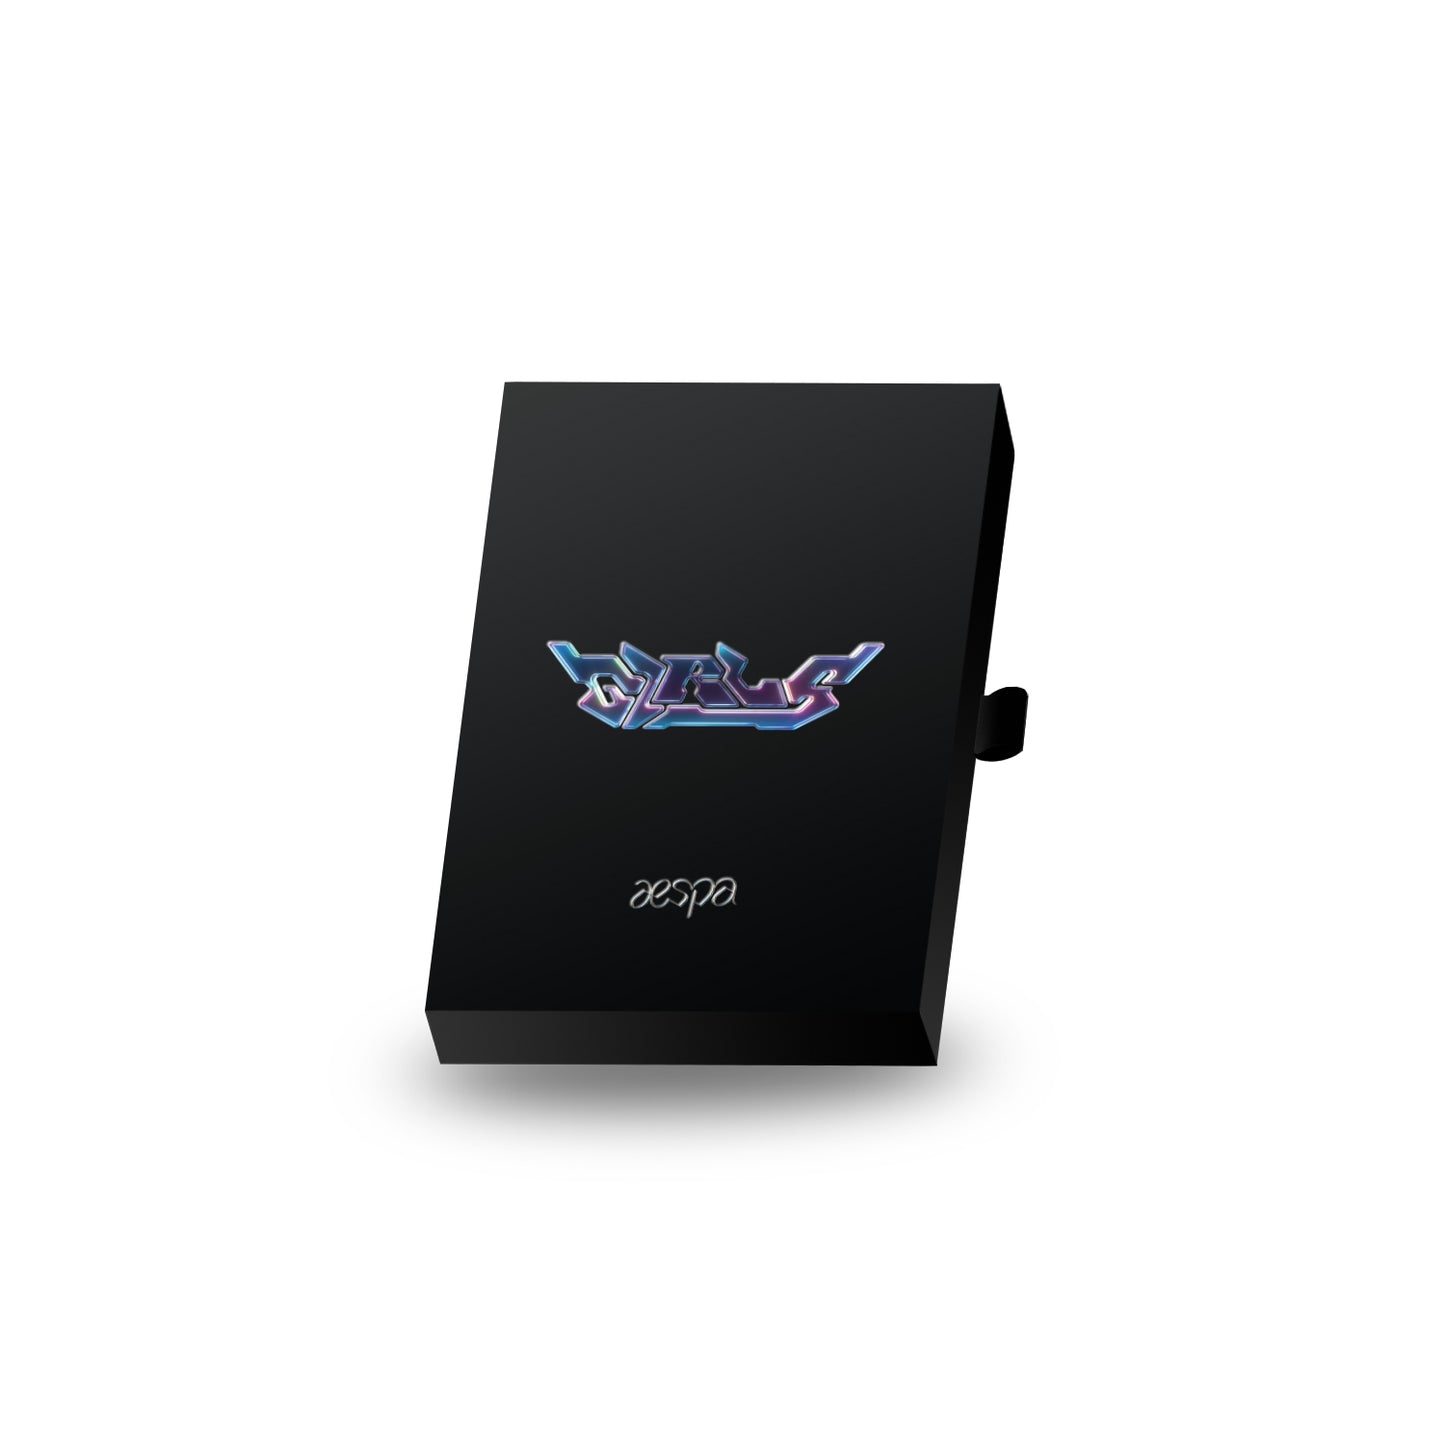 The 2nd Mini Album "Girls" Notepad Deluxe Box